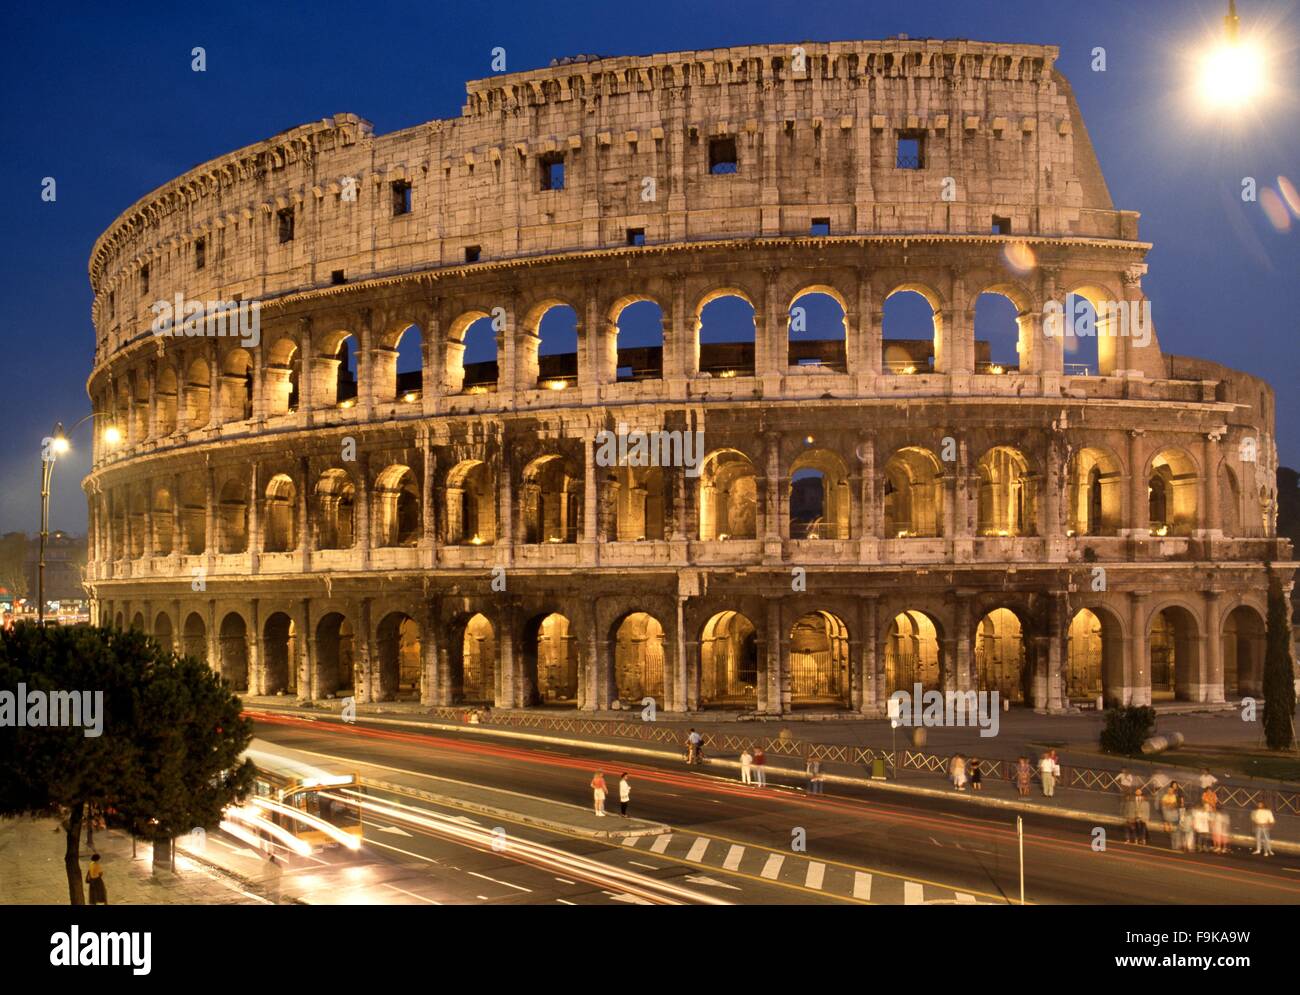 View of the Colosseum at night, Rome, Italy, Europe. Stock Photo